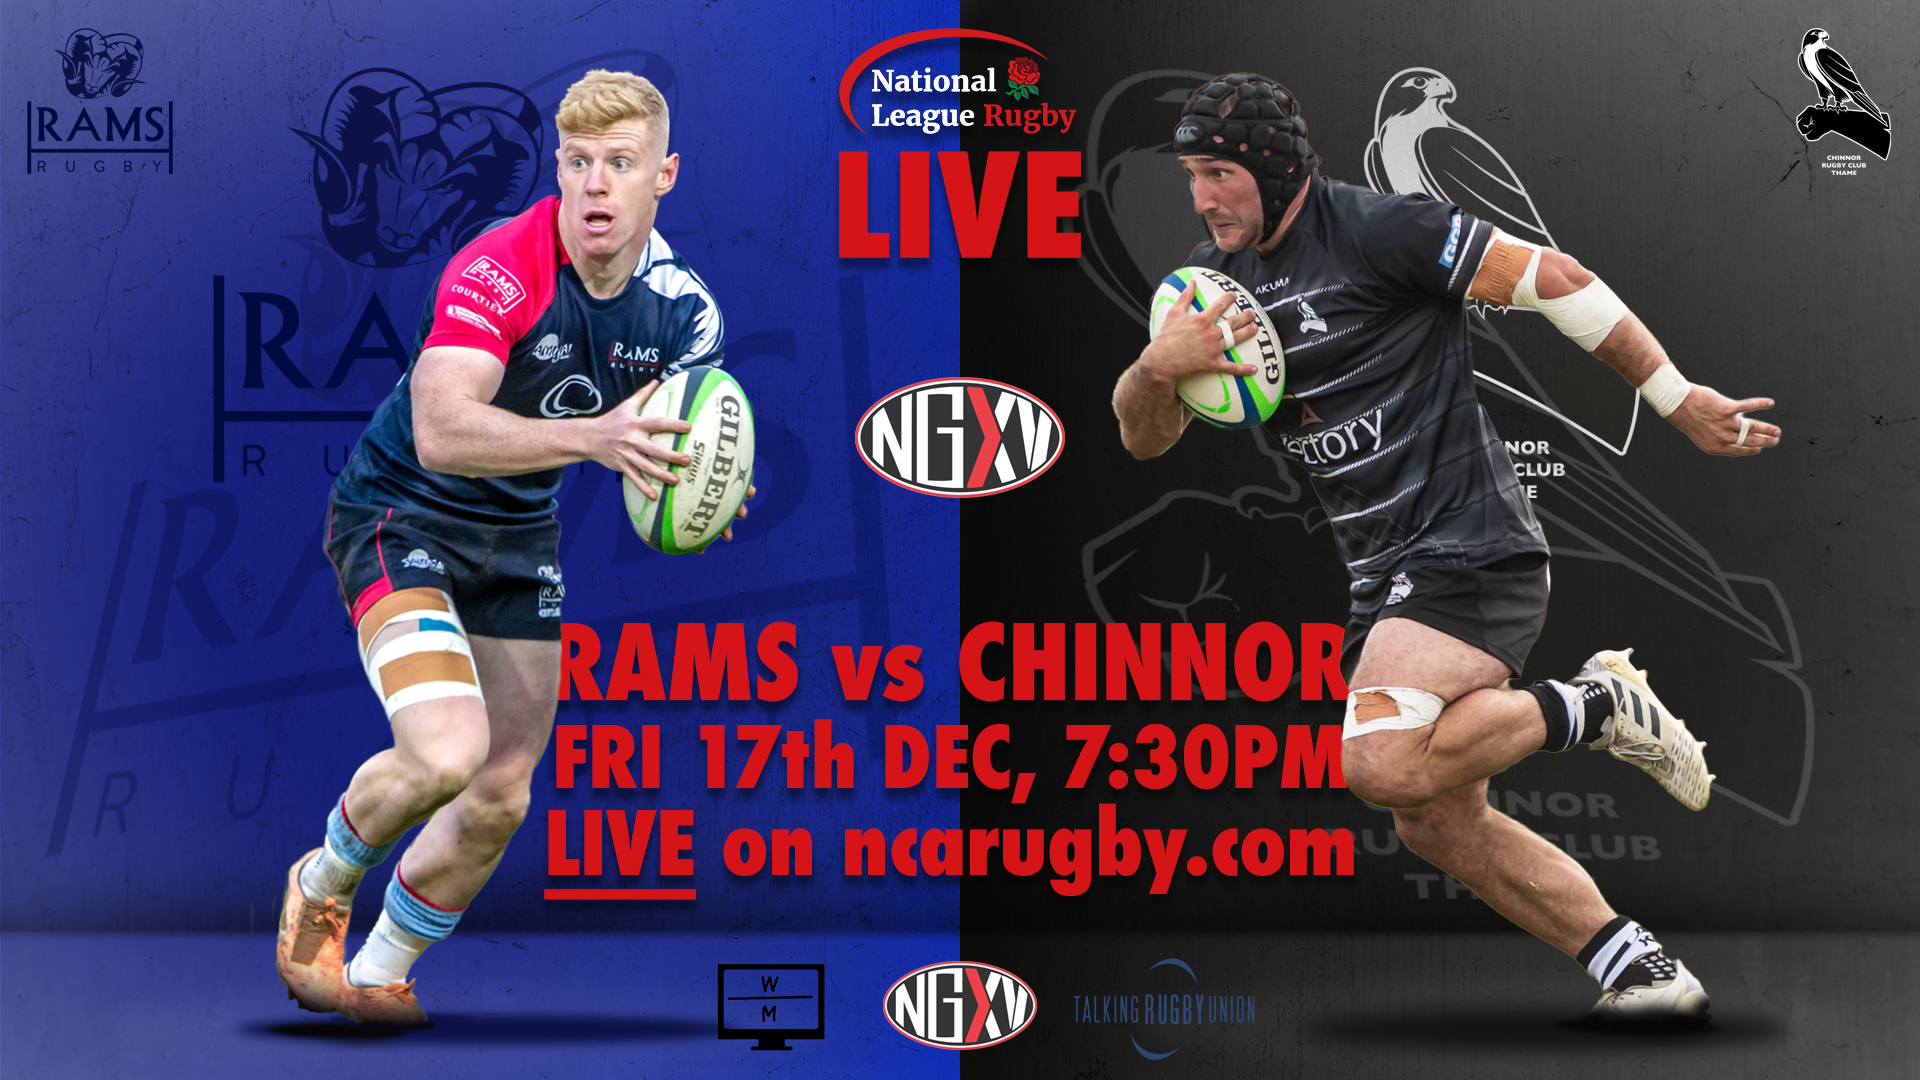 Live Stream NextGenXV link up with National League Rugby and Talking Rugby Union to Live Stream Rams RFC v Chinnor